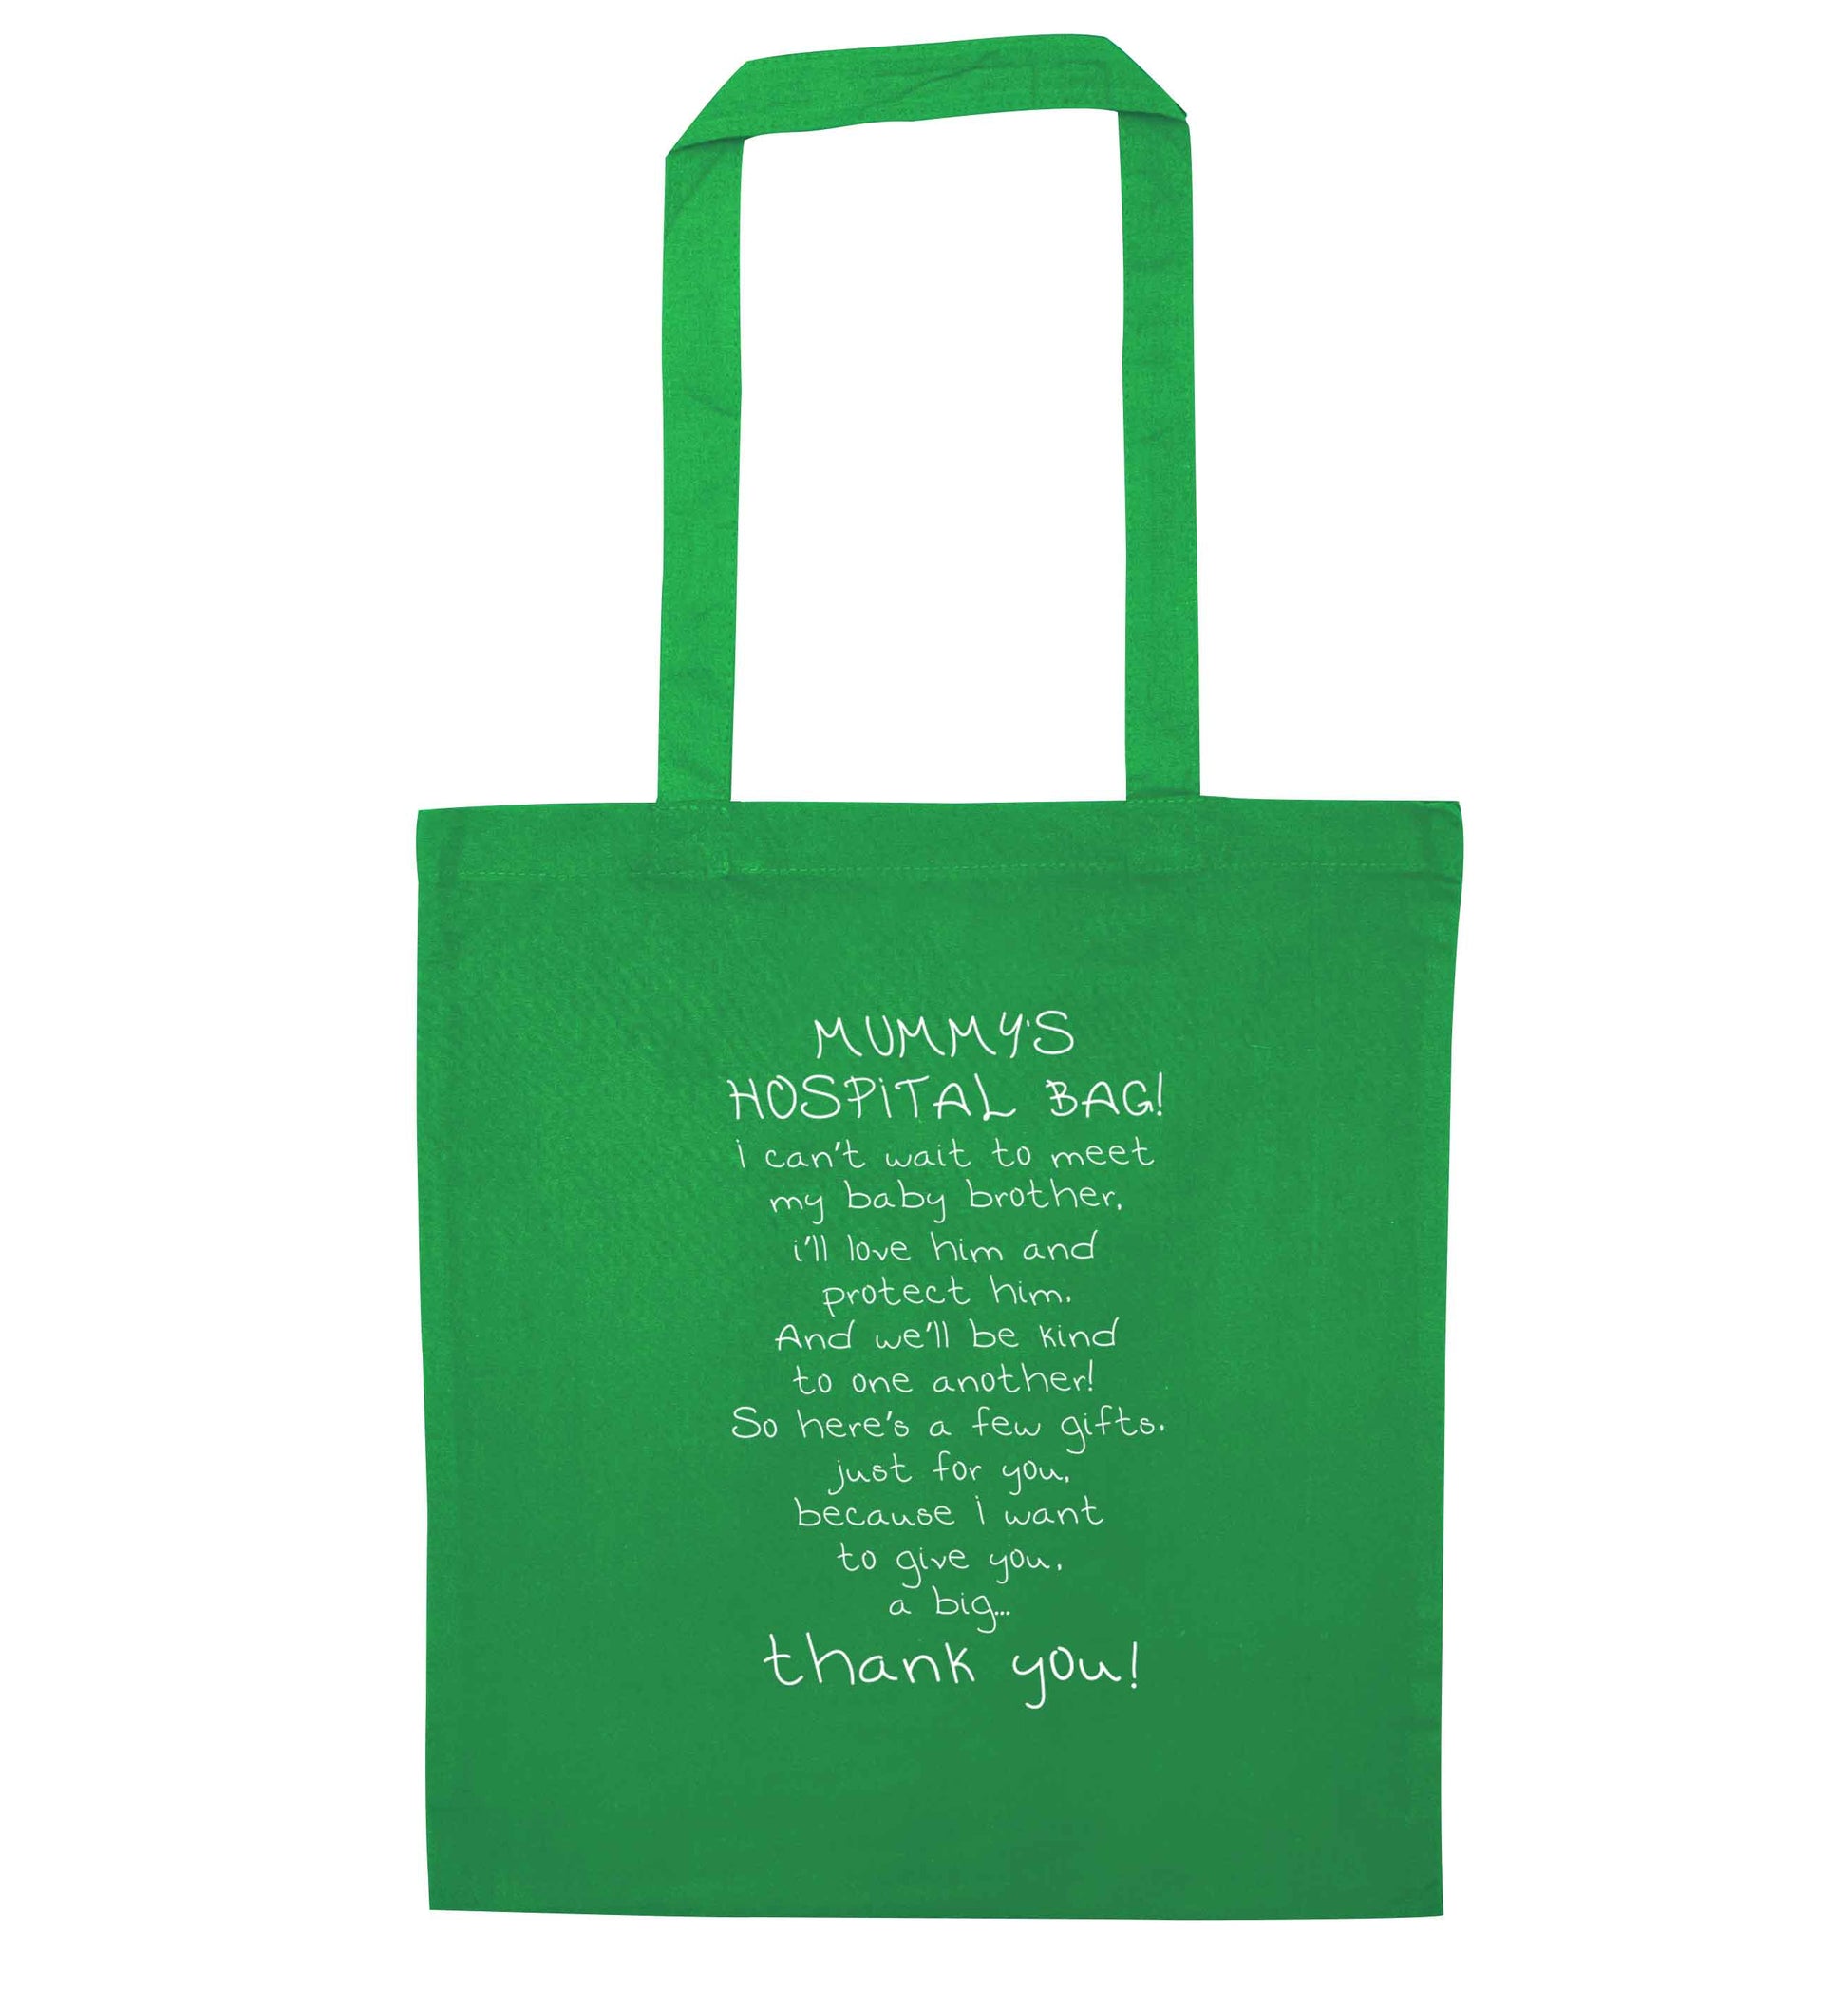 Mummy's hospital bag poem baby brother green tote bag